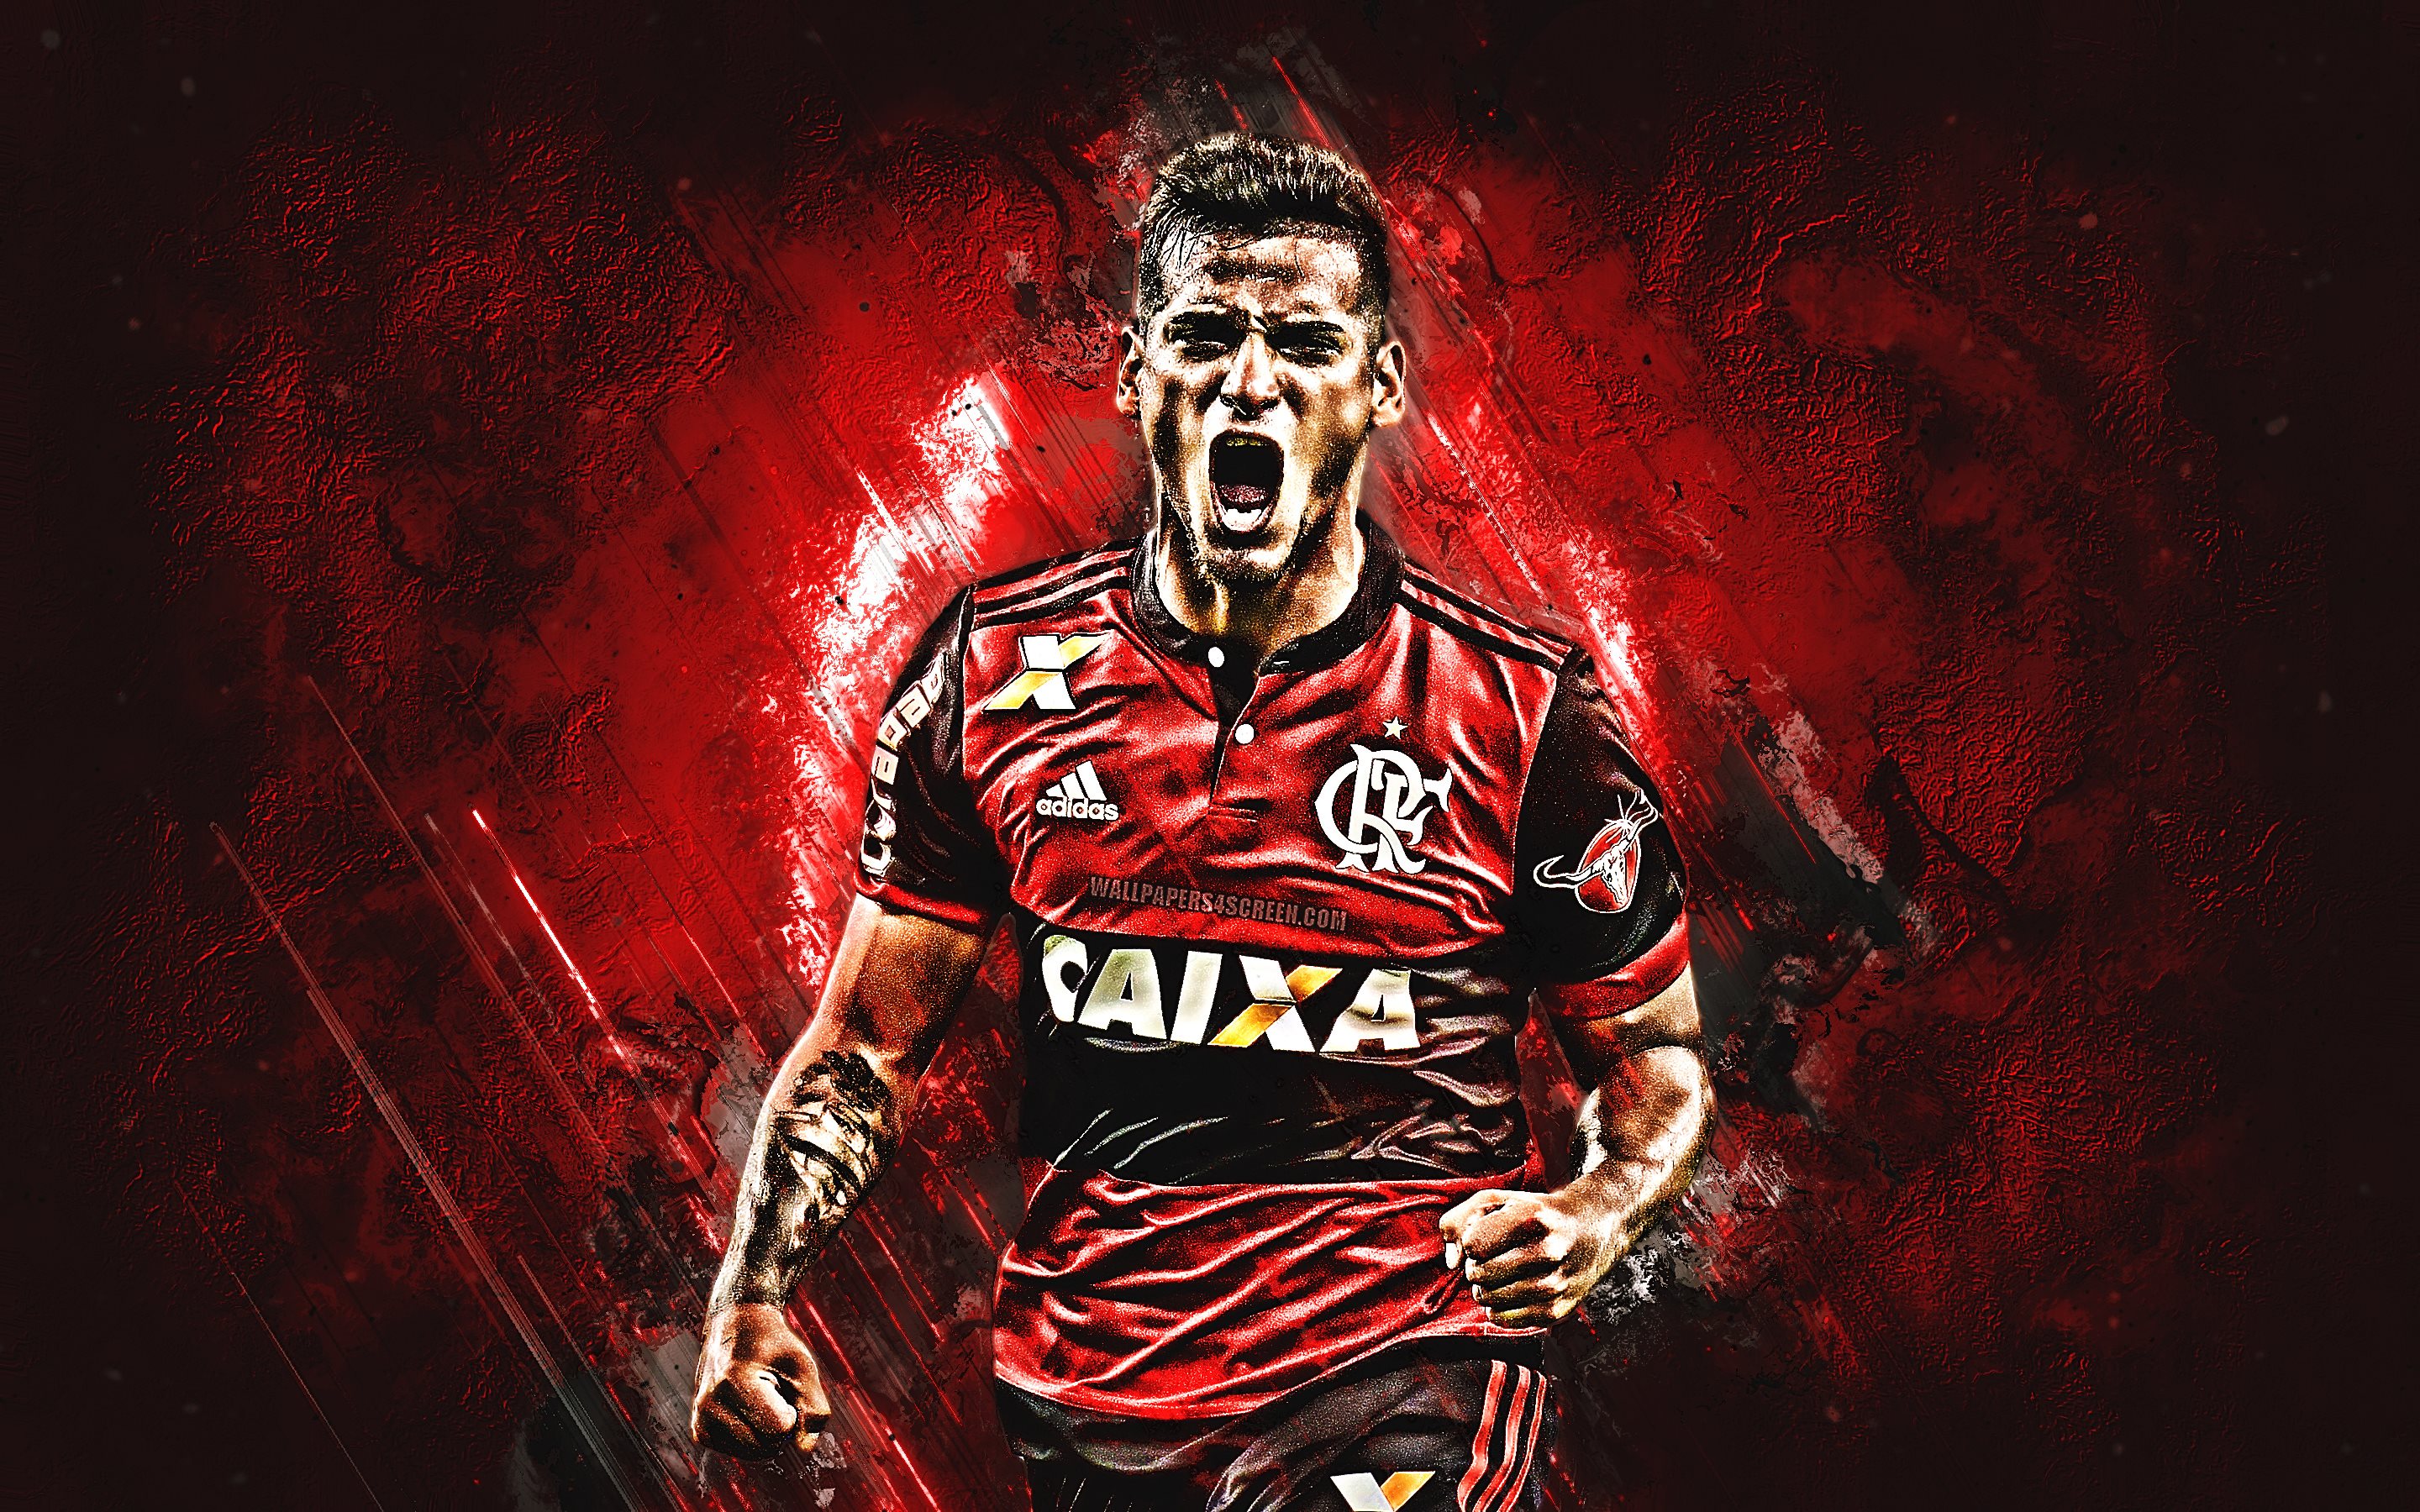 Download wallpaper Miguel Trauco, grunge, Flamengo FC, red